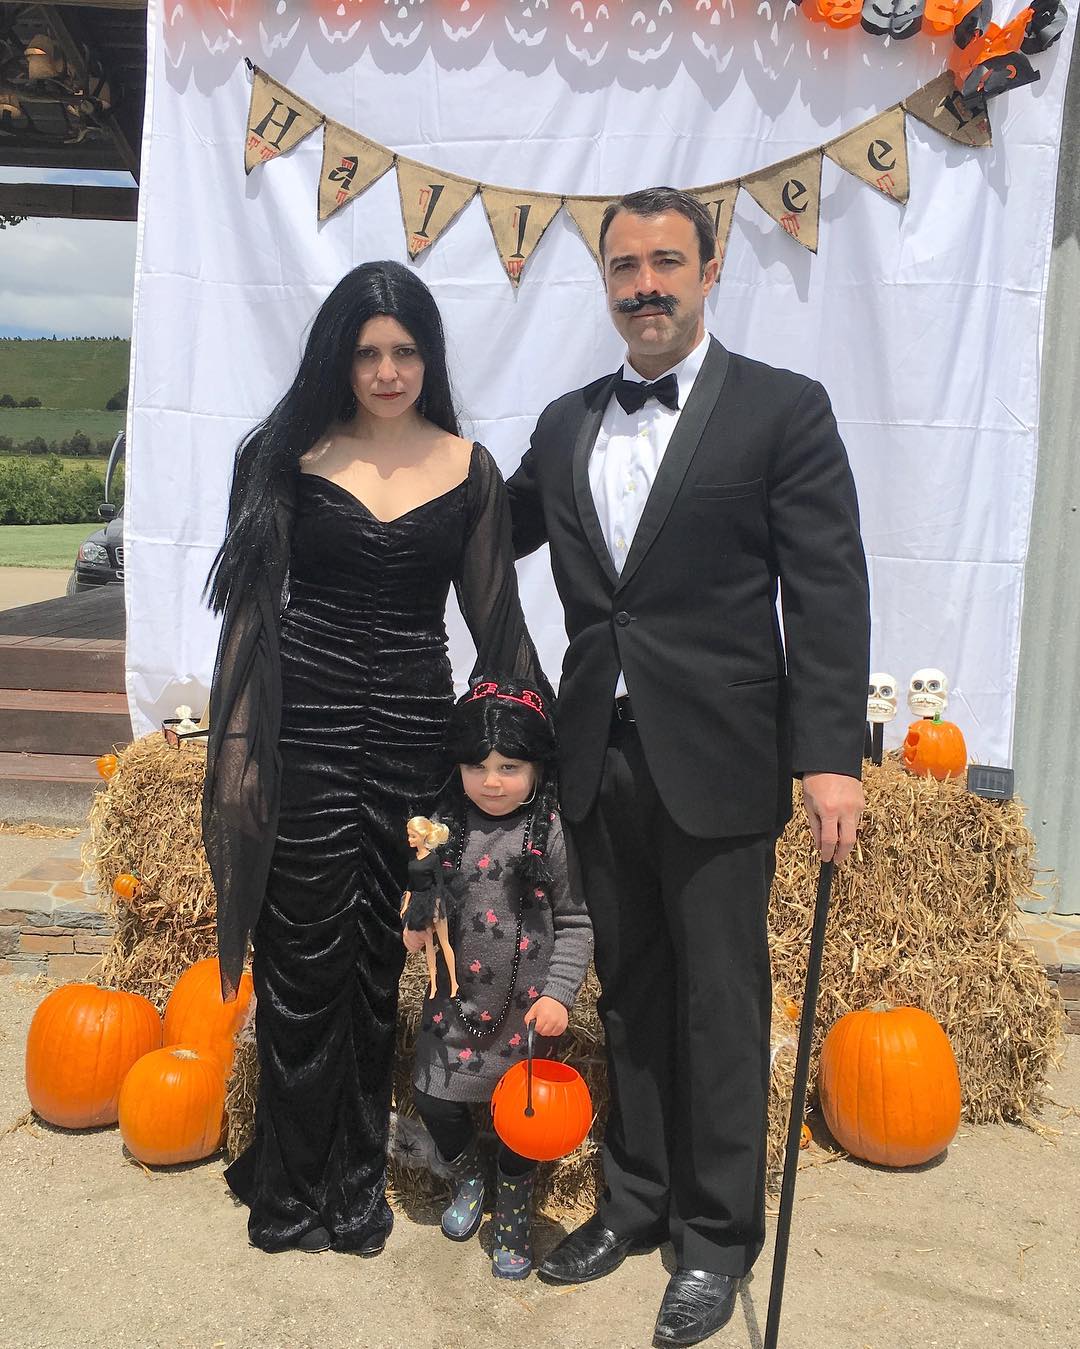 Chris And His Family Celebrating Halloween